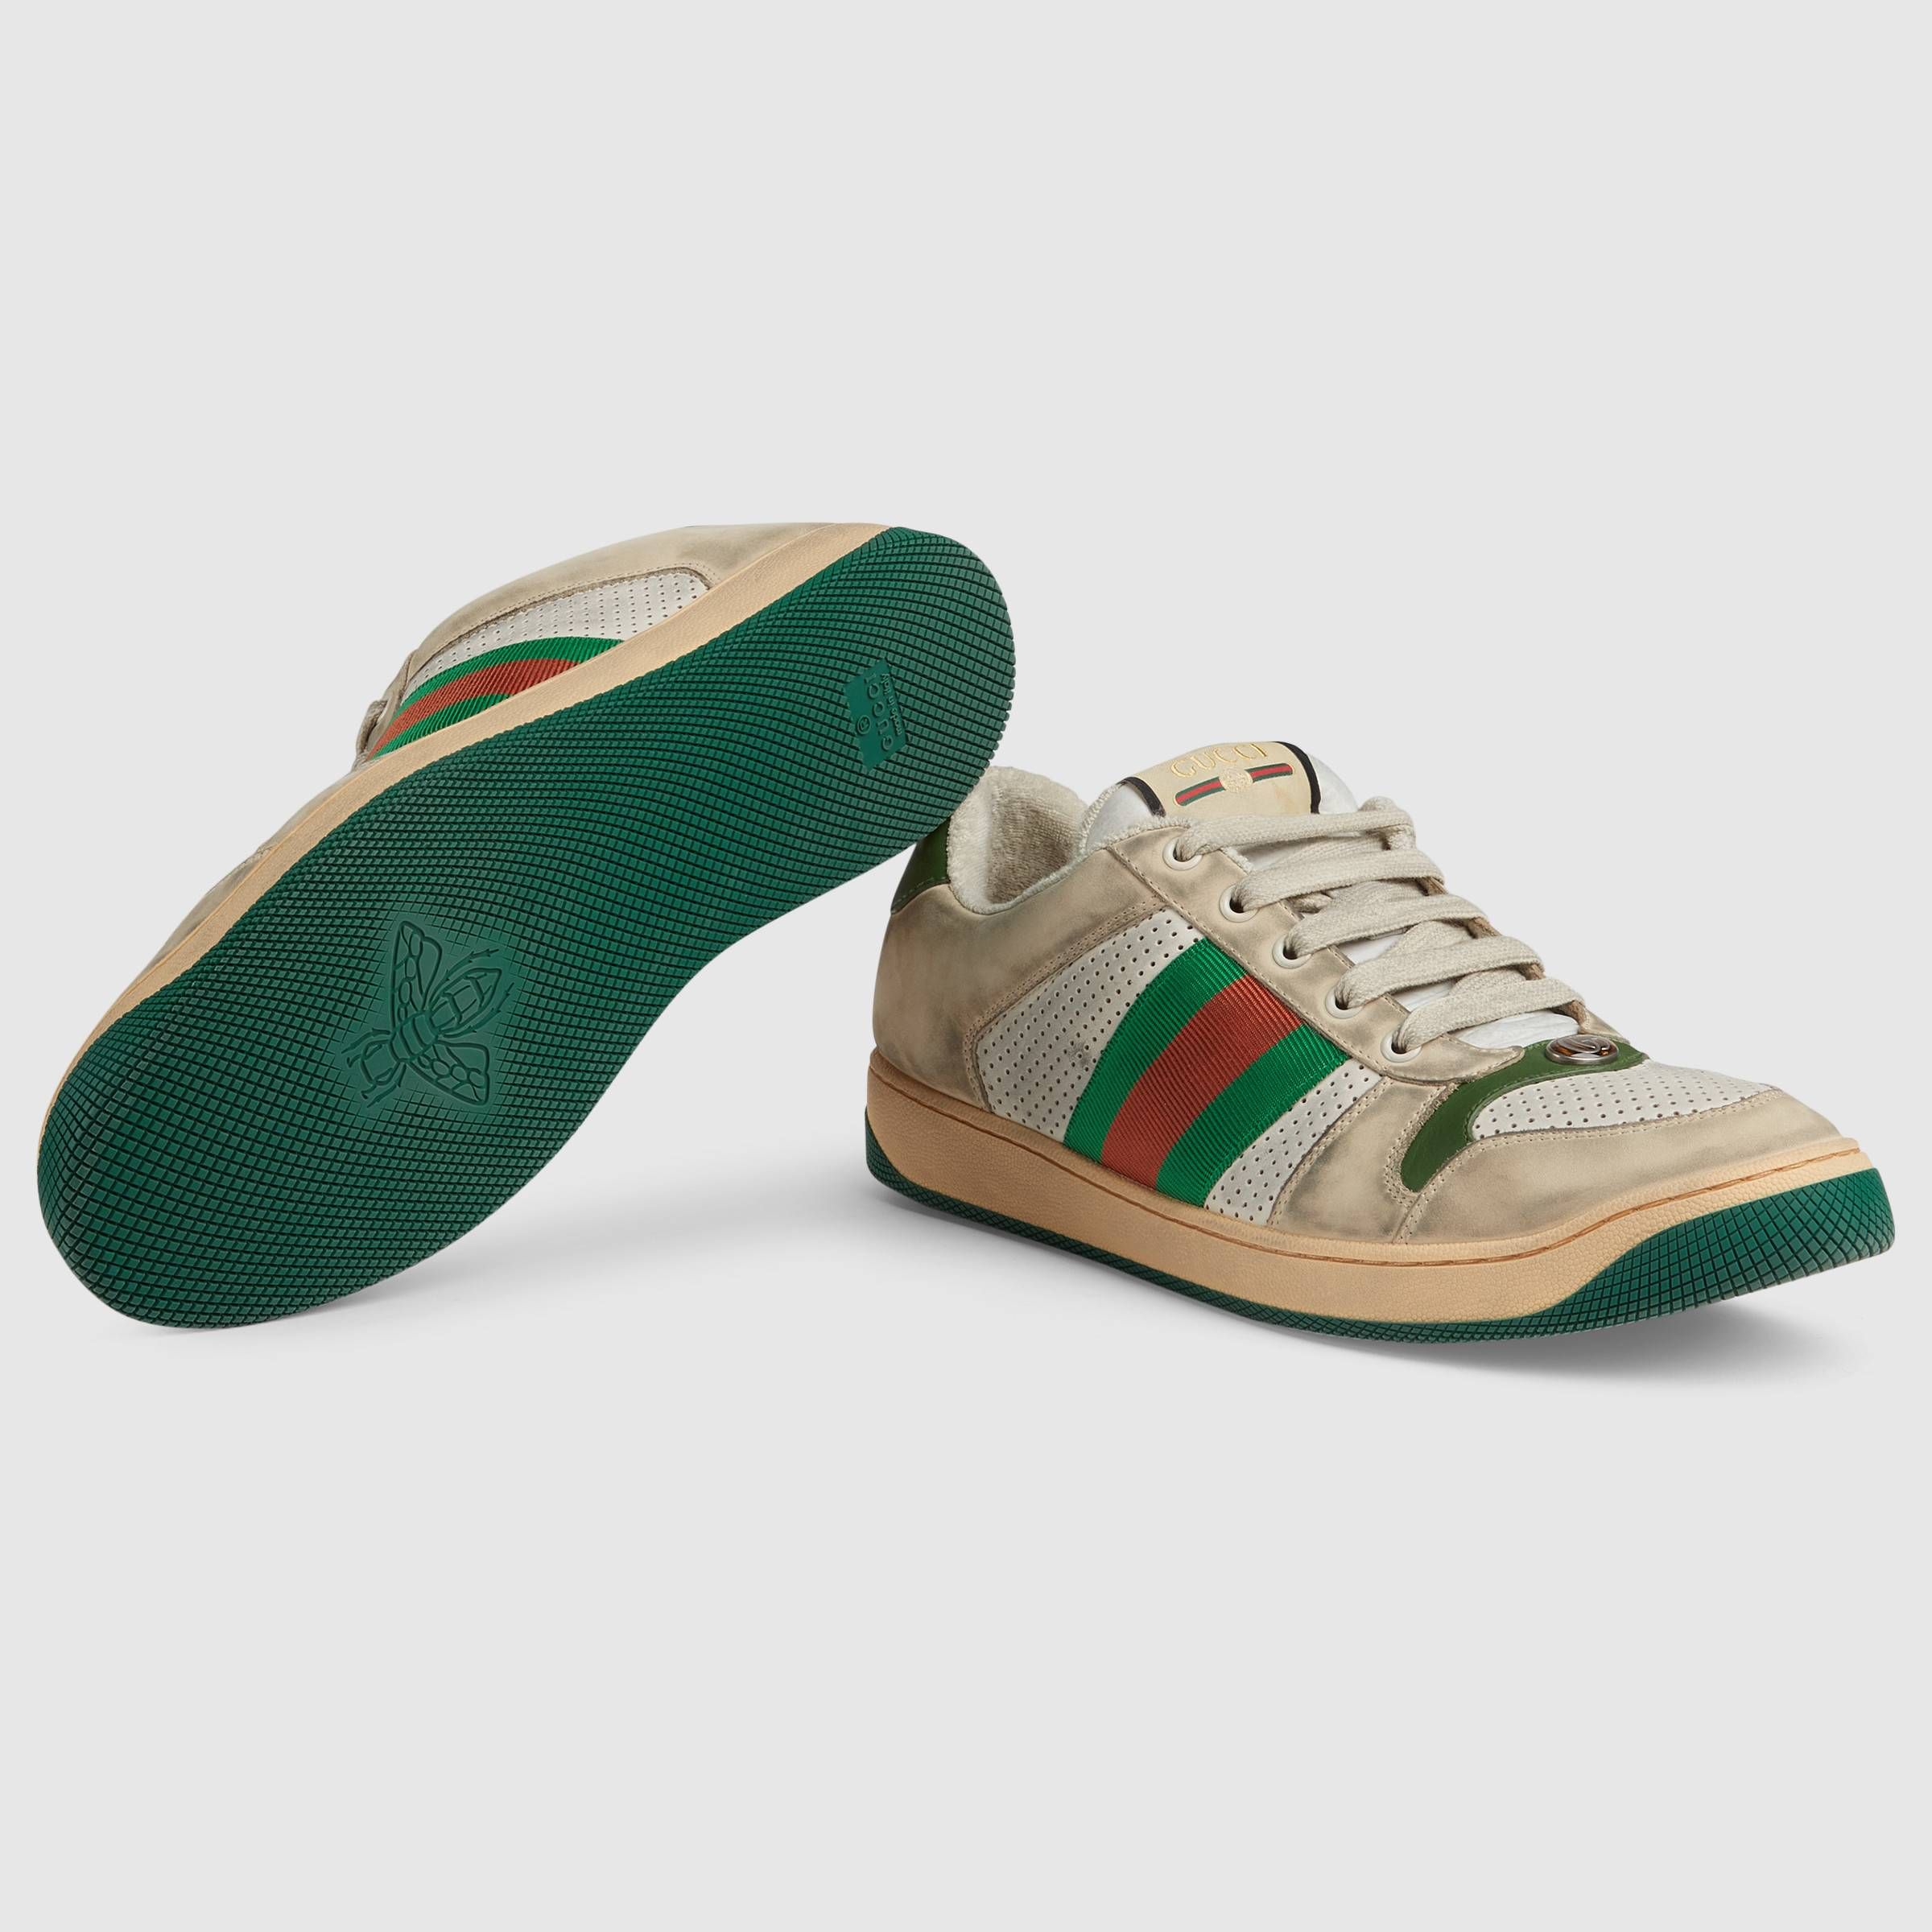 gucci dirty sneakers mind blowing price